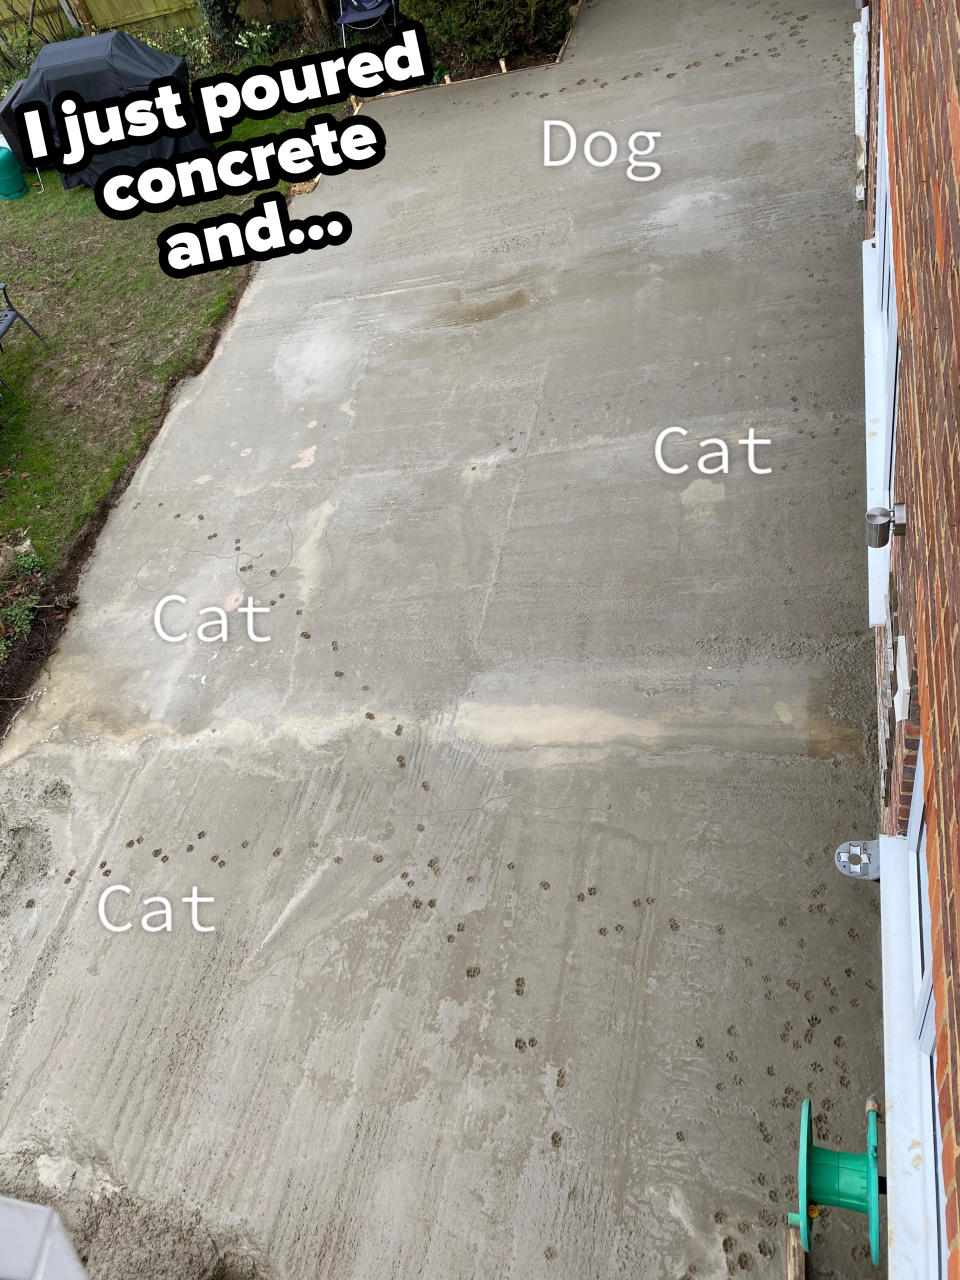 Fresh concrete sidewalk with paw prints; labeled "Dog" near large prints and "Cat" by smaller prints